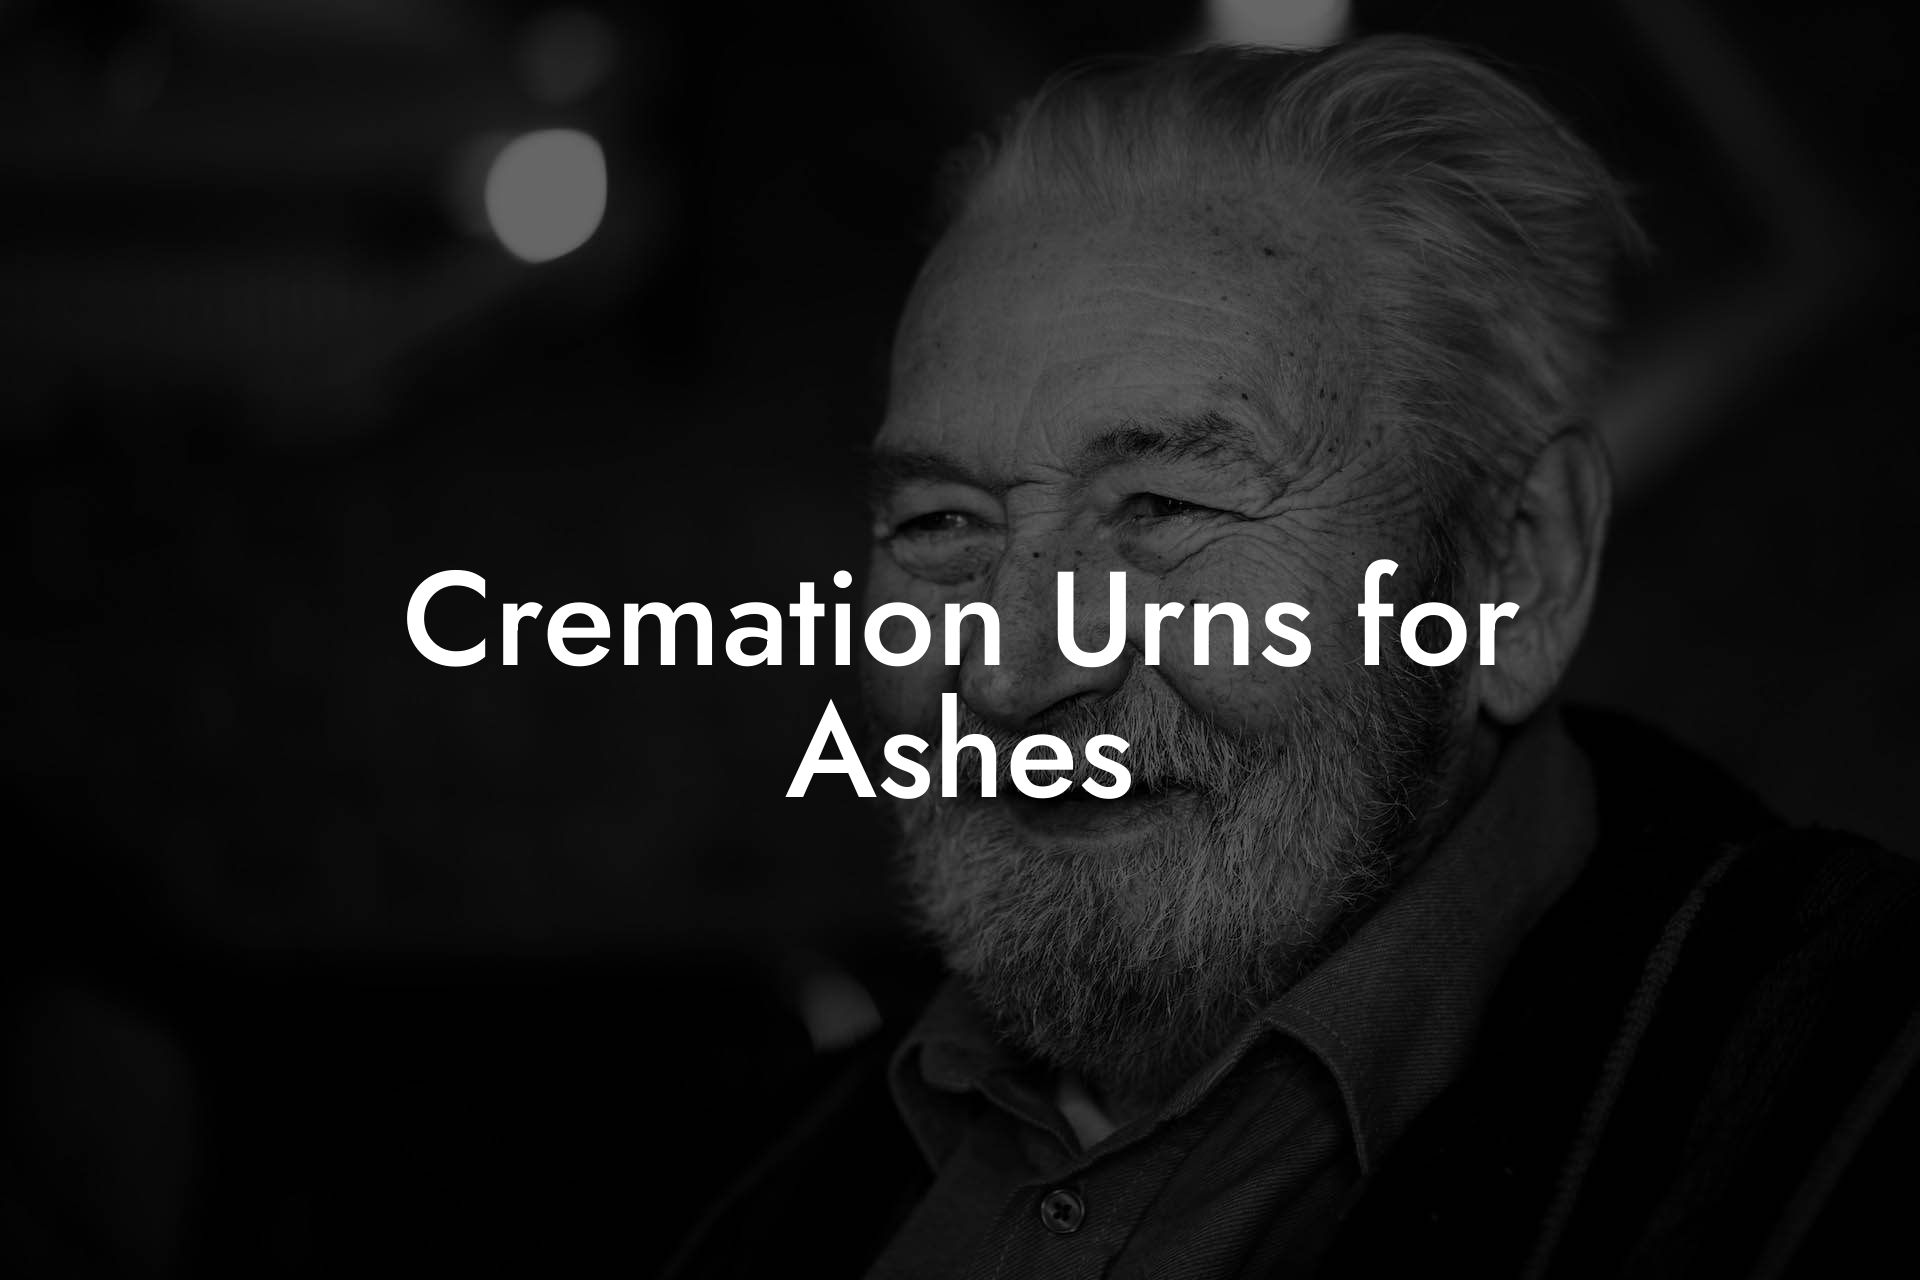 Cremation Urns for Ashes